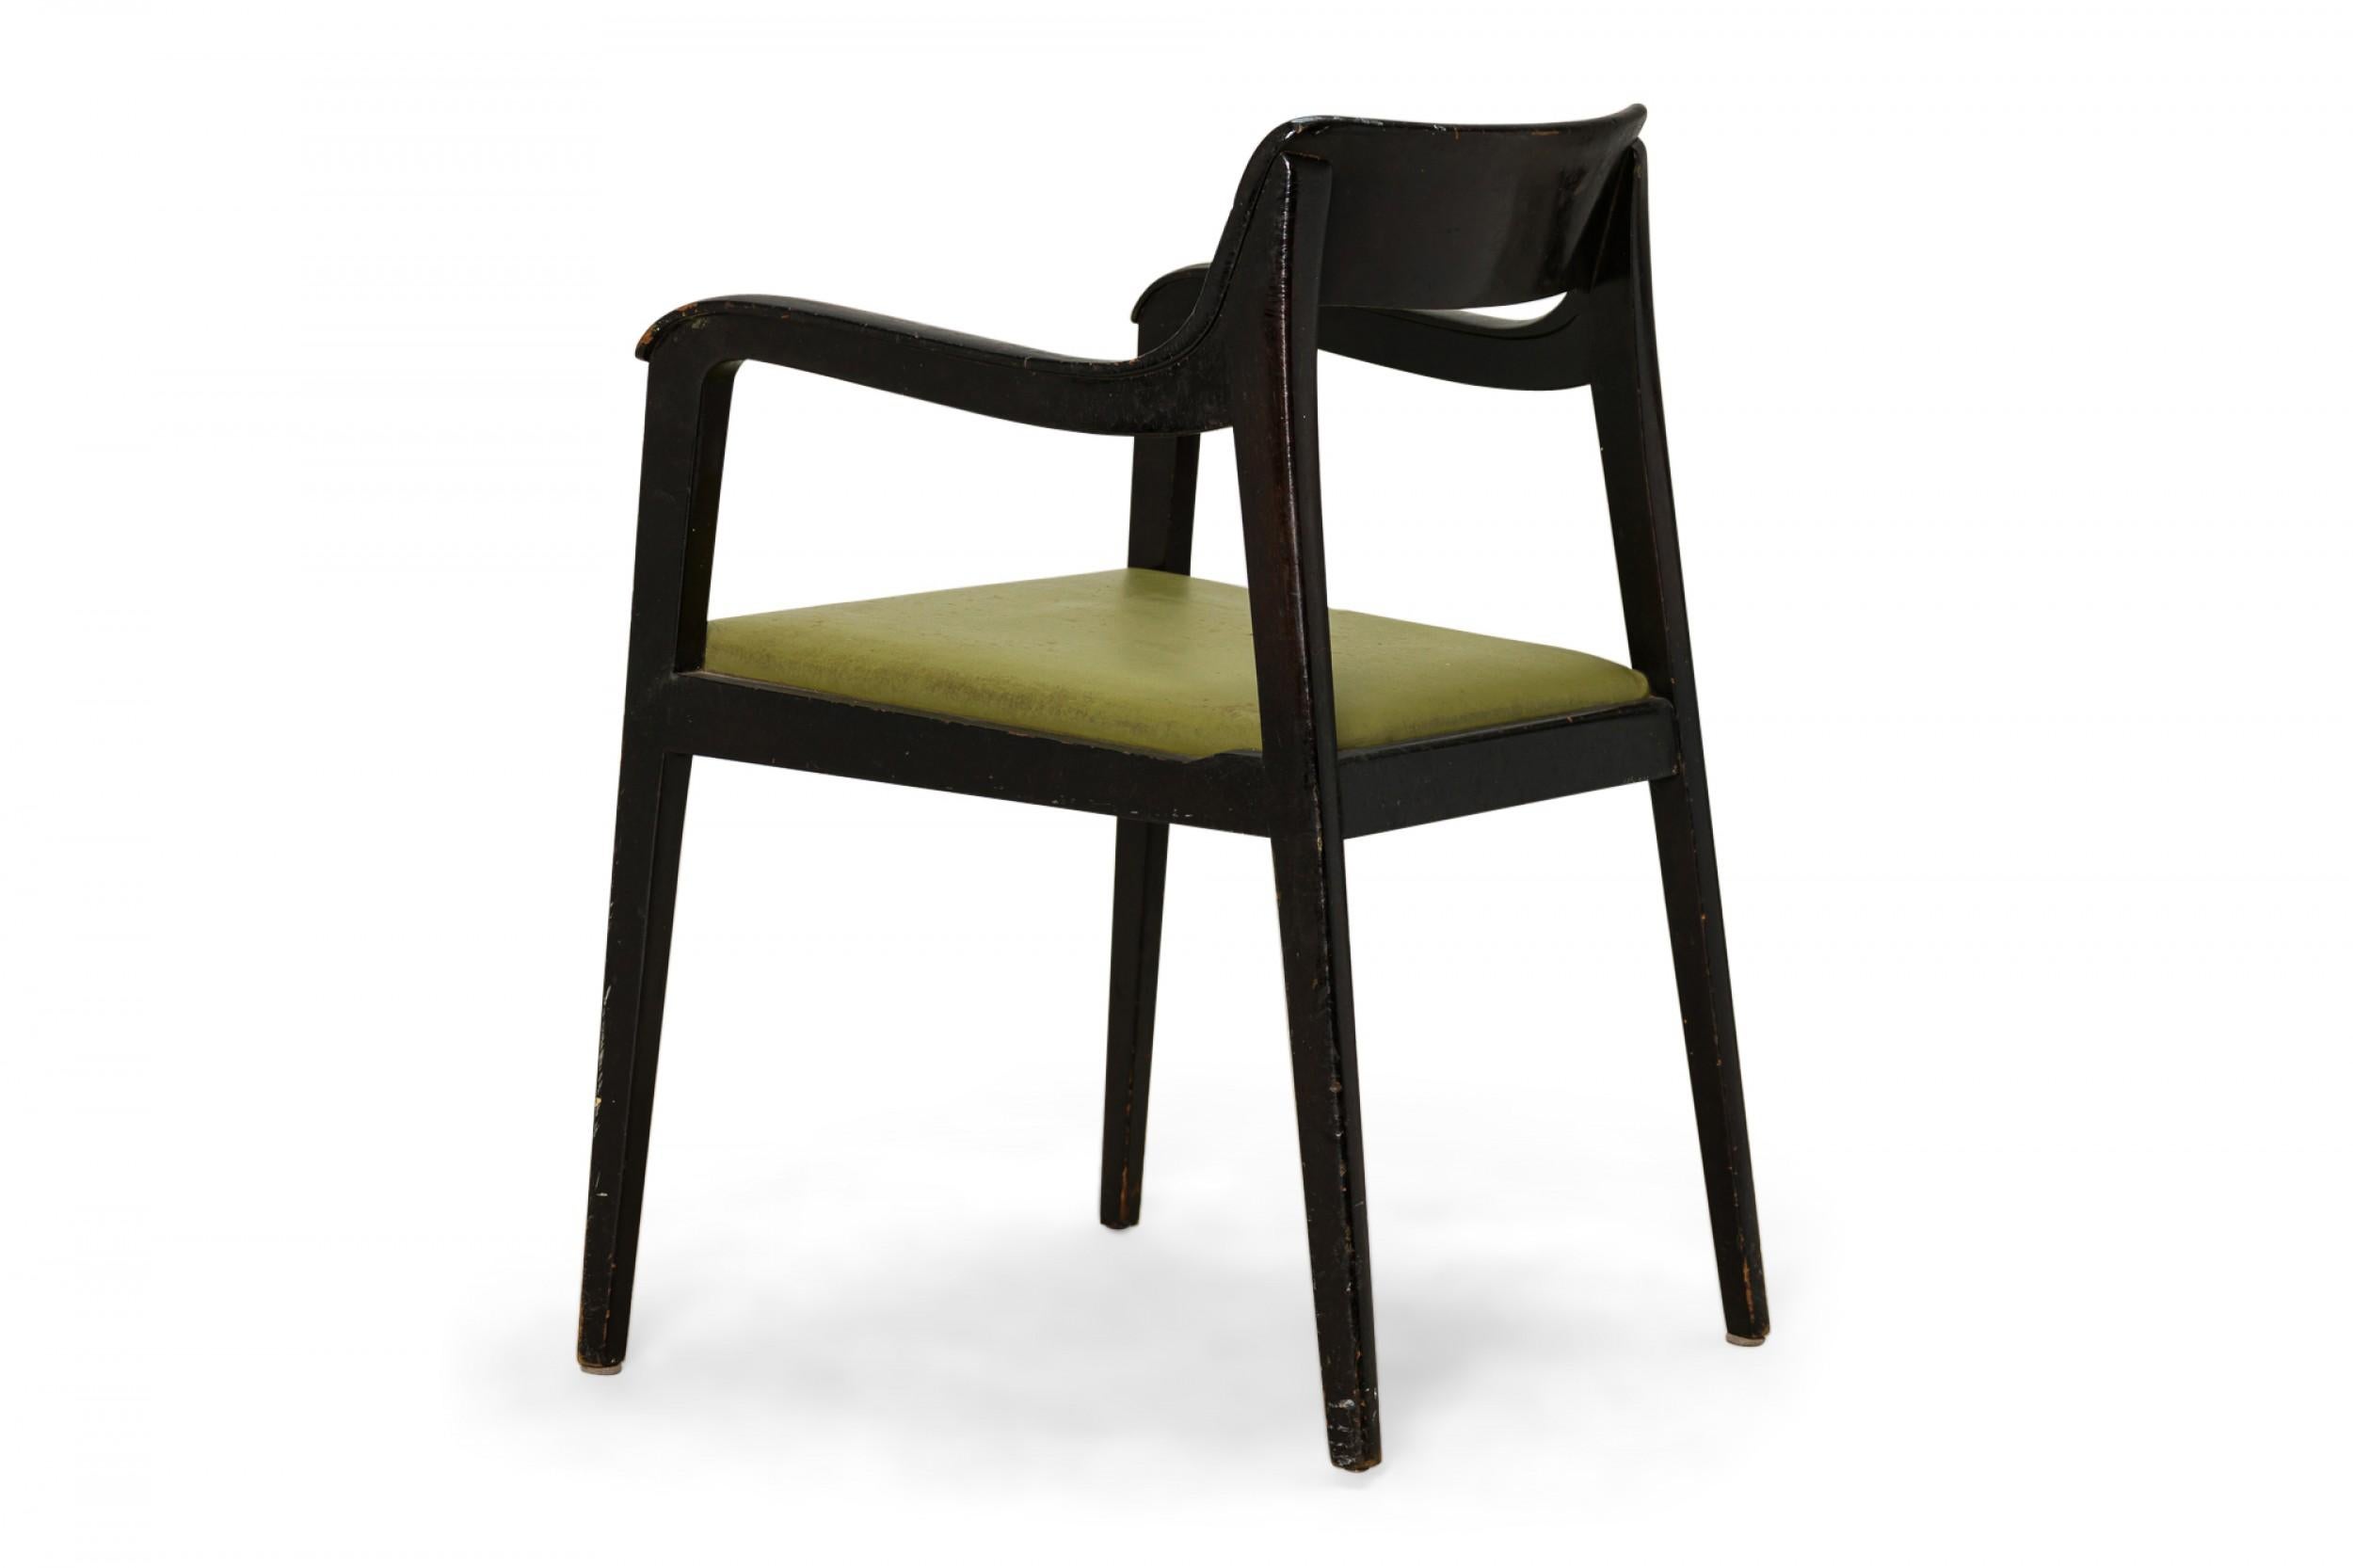 Set of 6 Edward Wormley for Dunbar 'Riemerschmid' Black and Green Dining Chairs In Good Condition For Sale In New York, NY